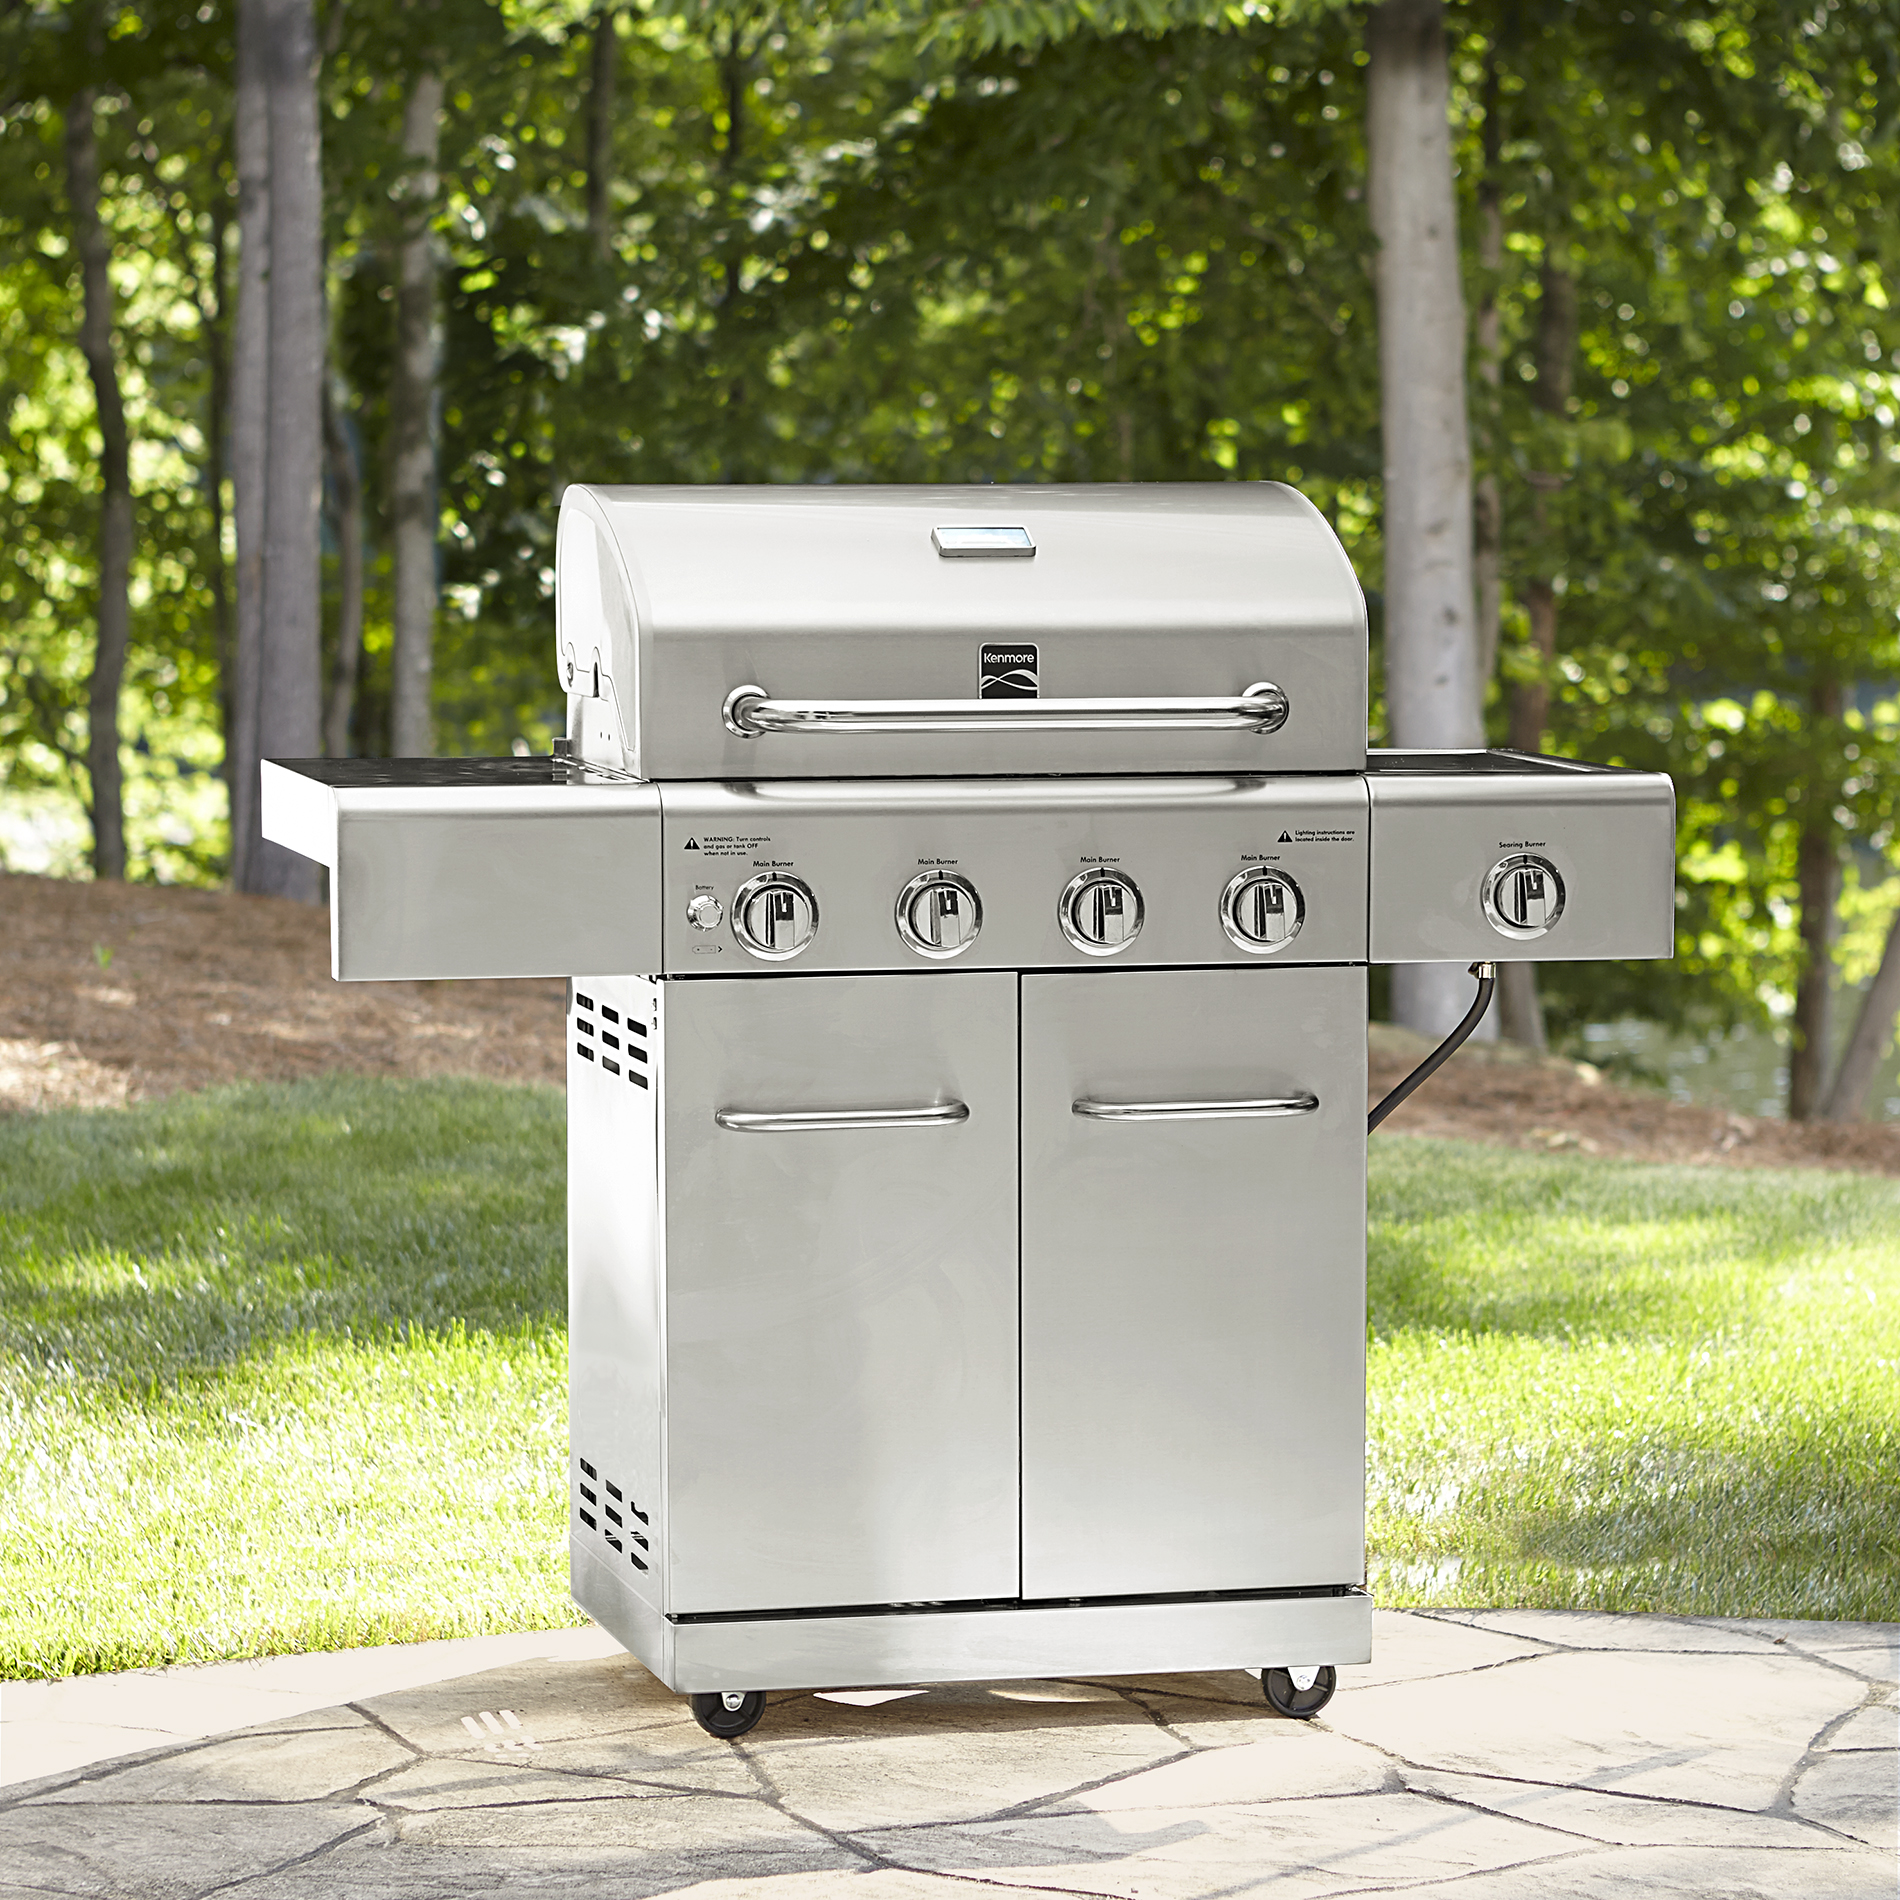 Kenmore 4 Burner Gas Stainless Steel Grill with Searing Side Burner Kenmore Stainless Steel Gas Grill